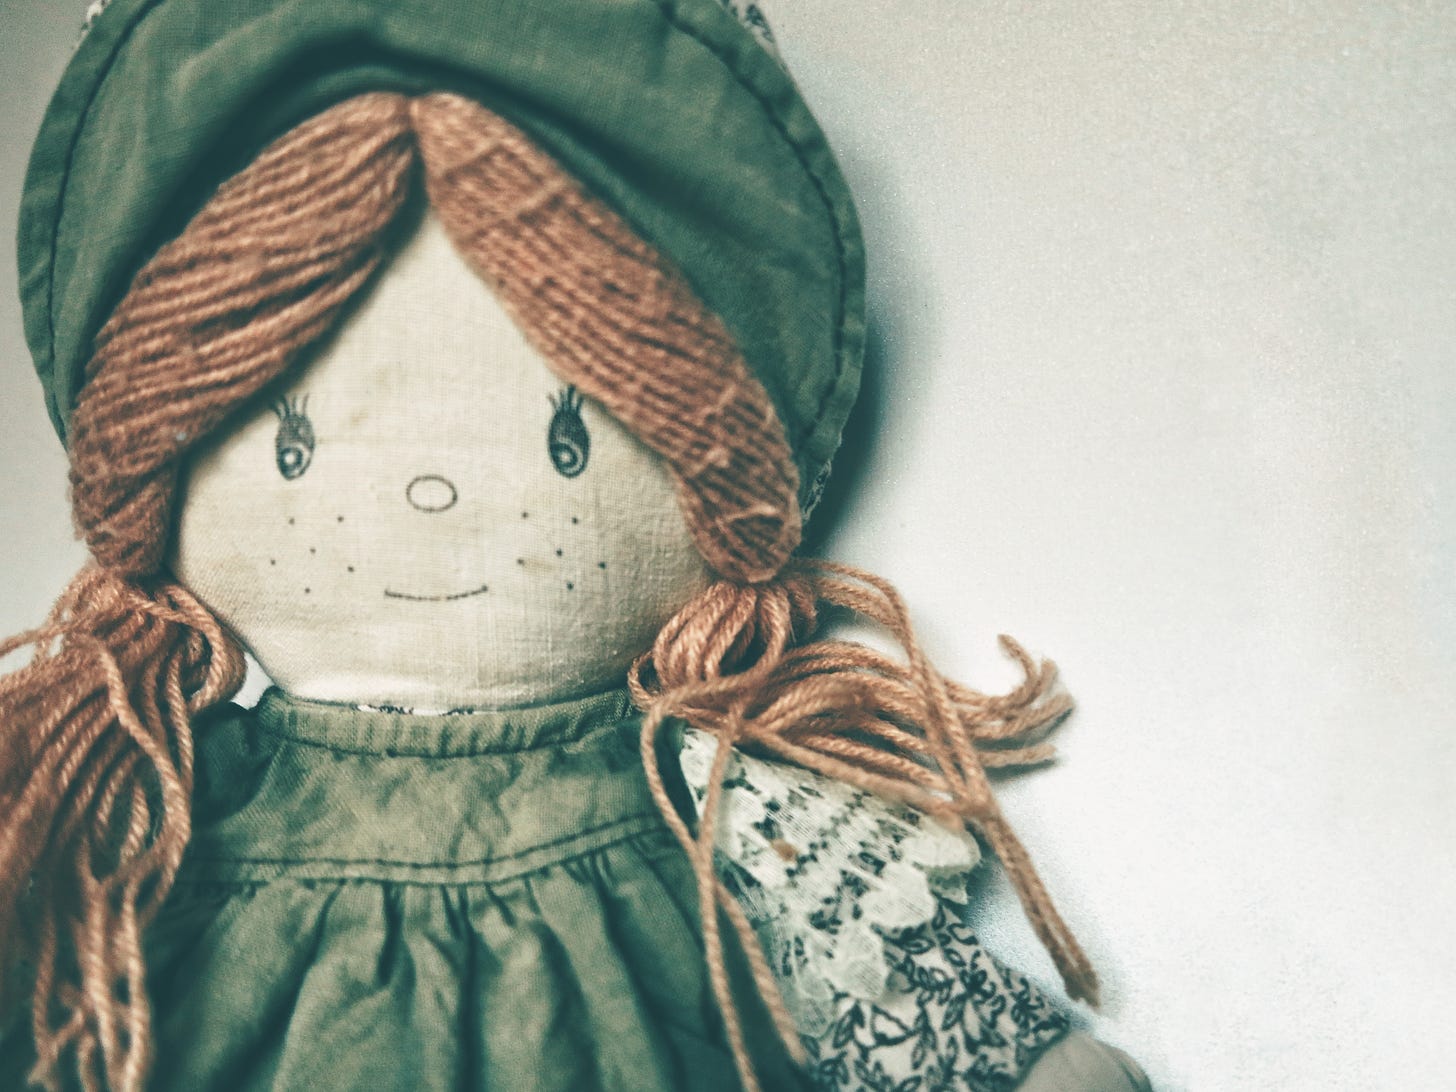 Cloth doll in green hat and dress with brown hair made of yarn.